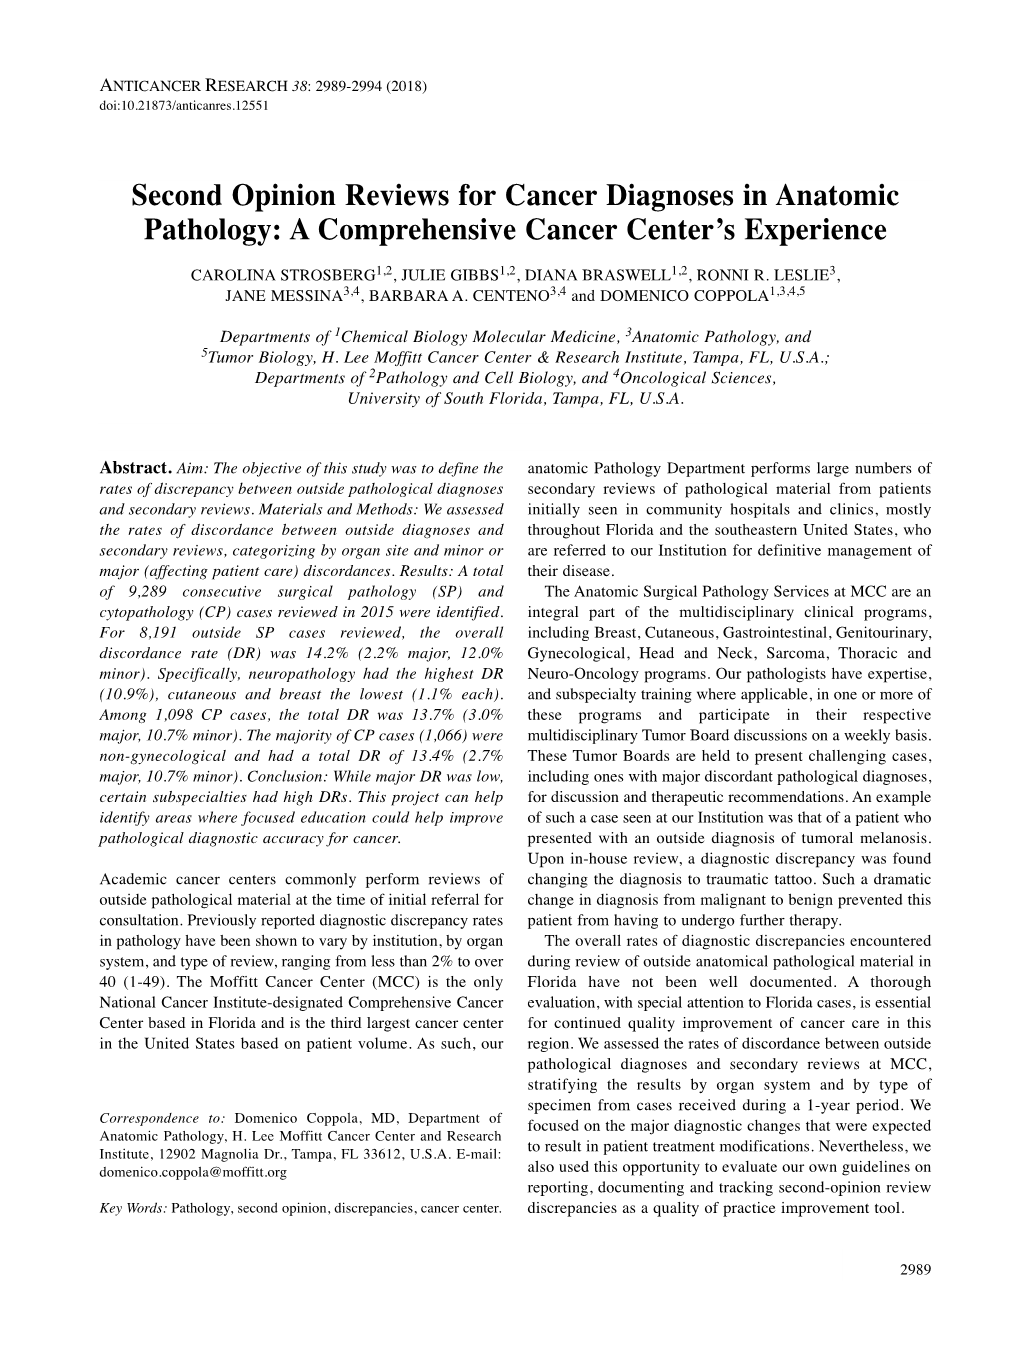 Second Opinion Reviews for Cancer Diagnoses in Anatomic Pathology